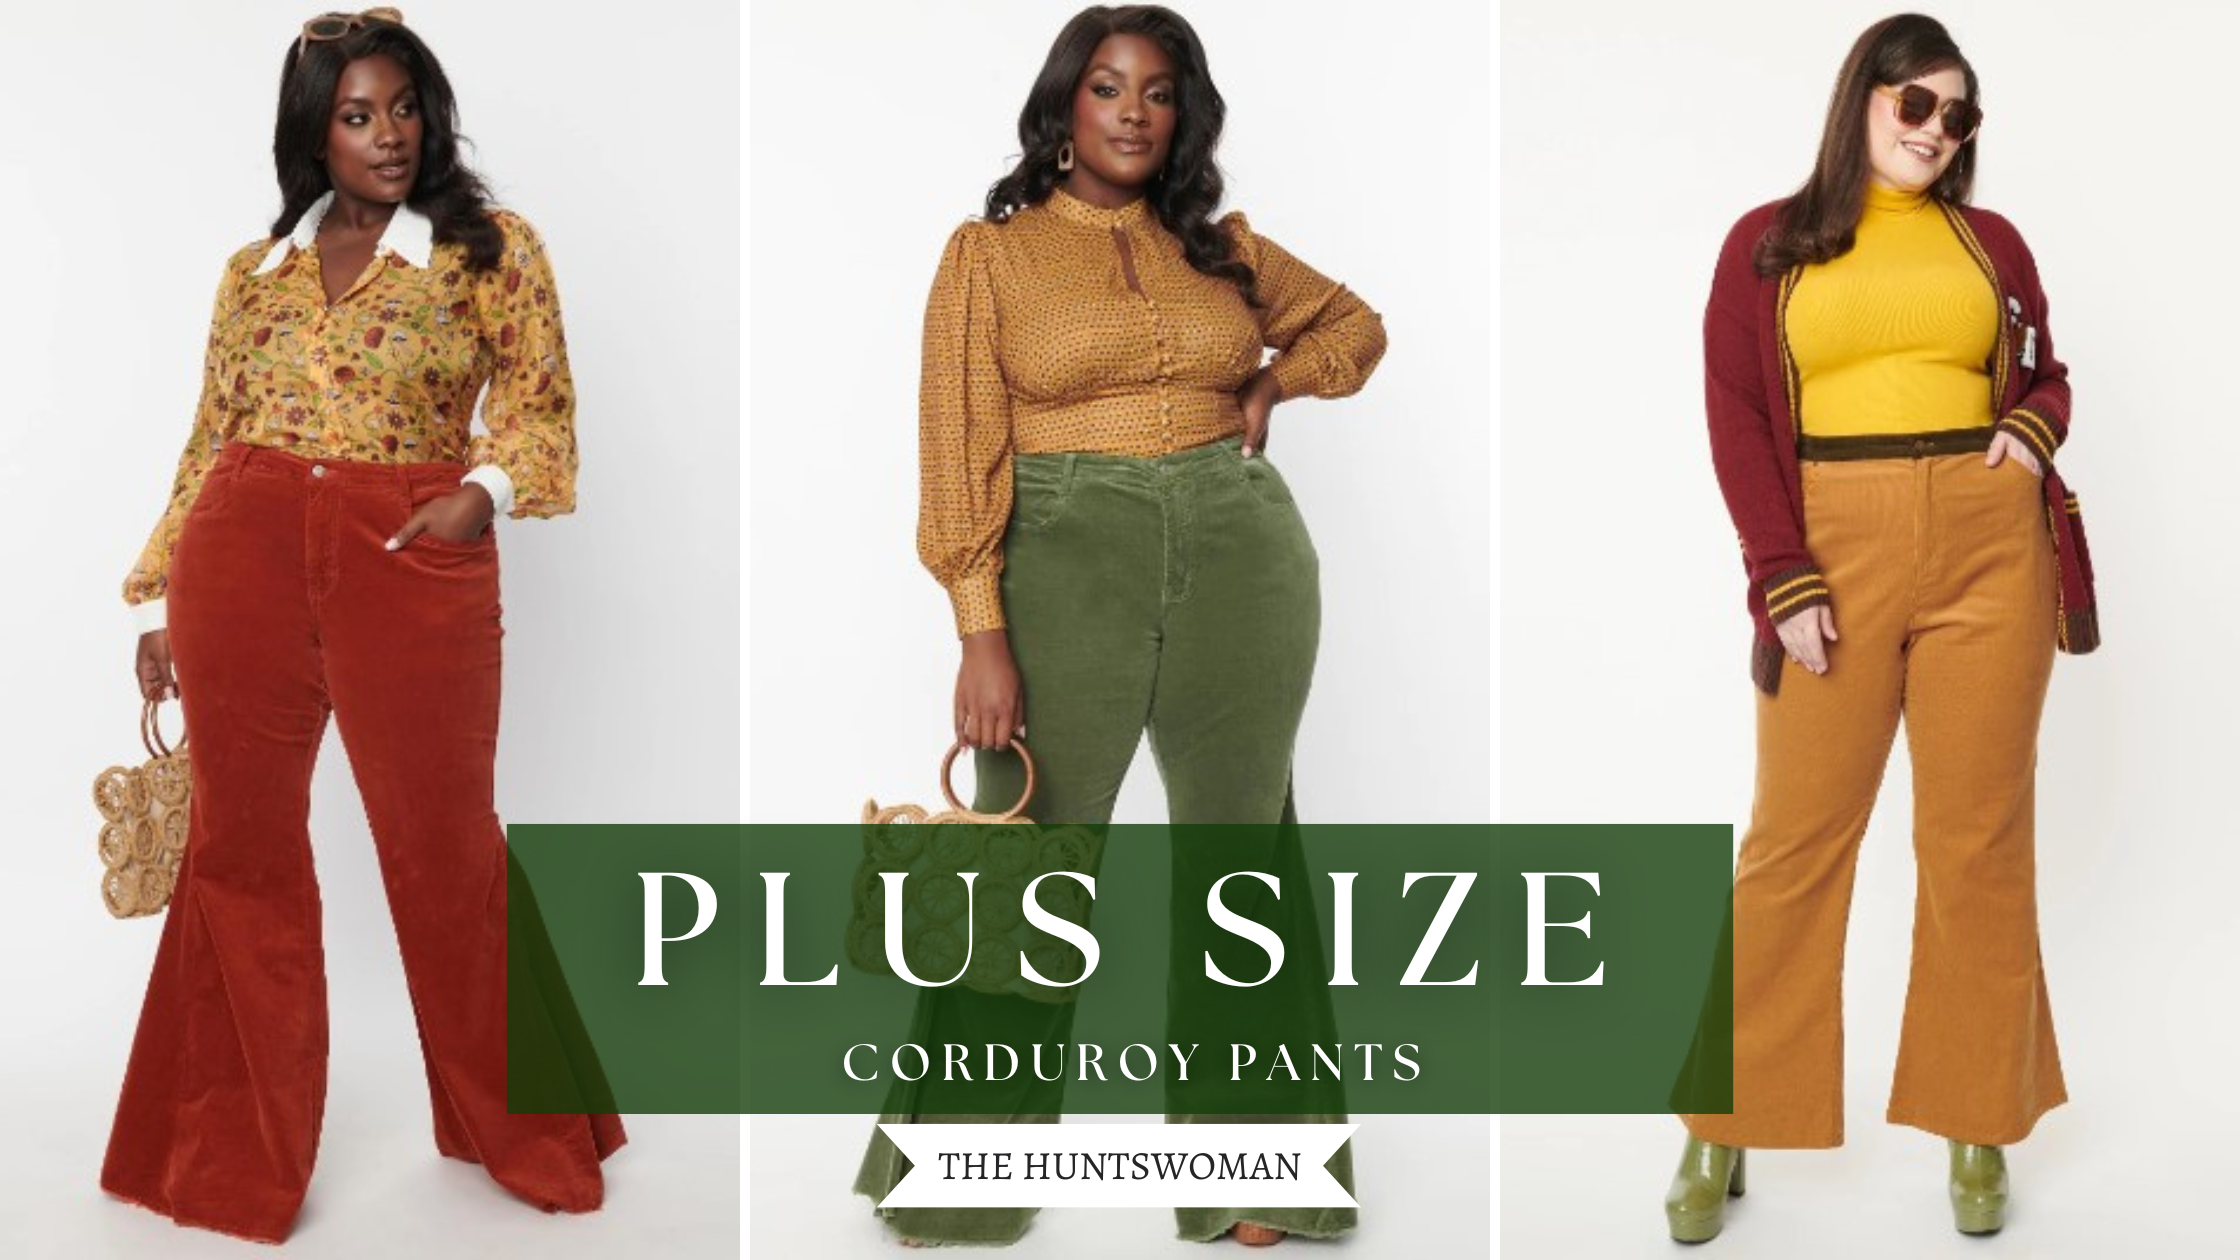 Where to Shop for Plus Size Corduroy Pants